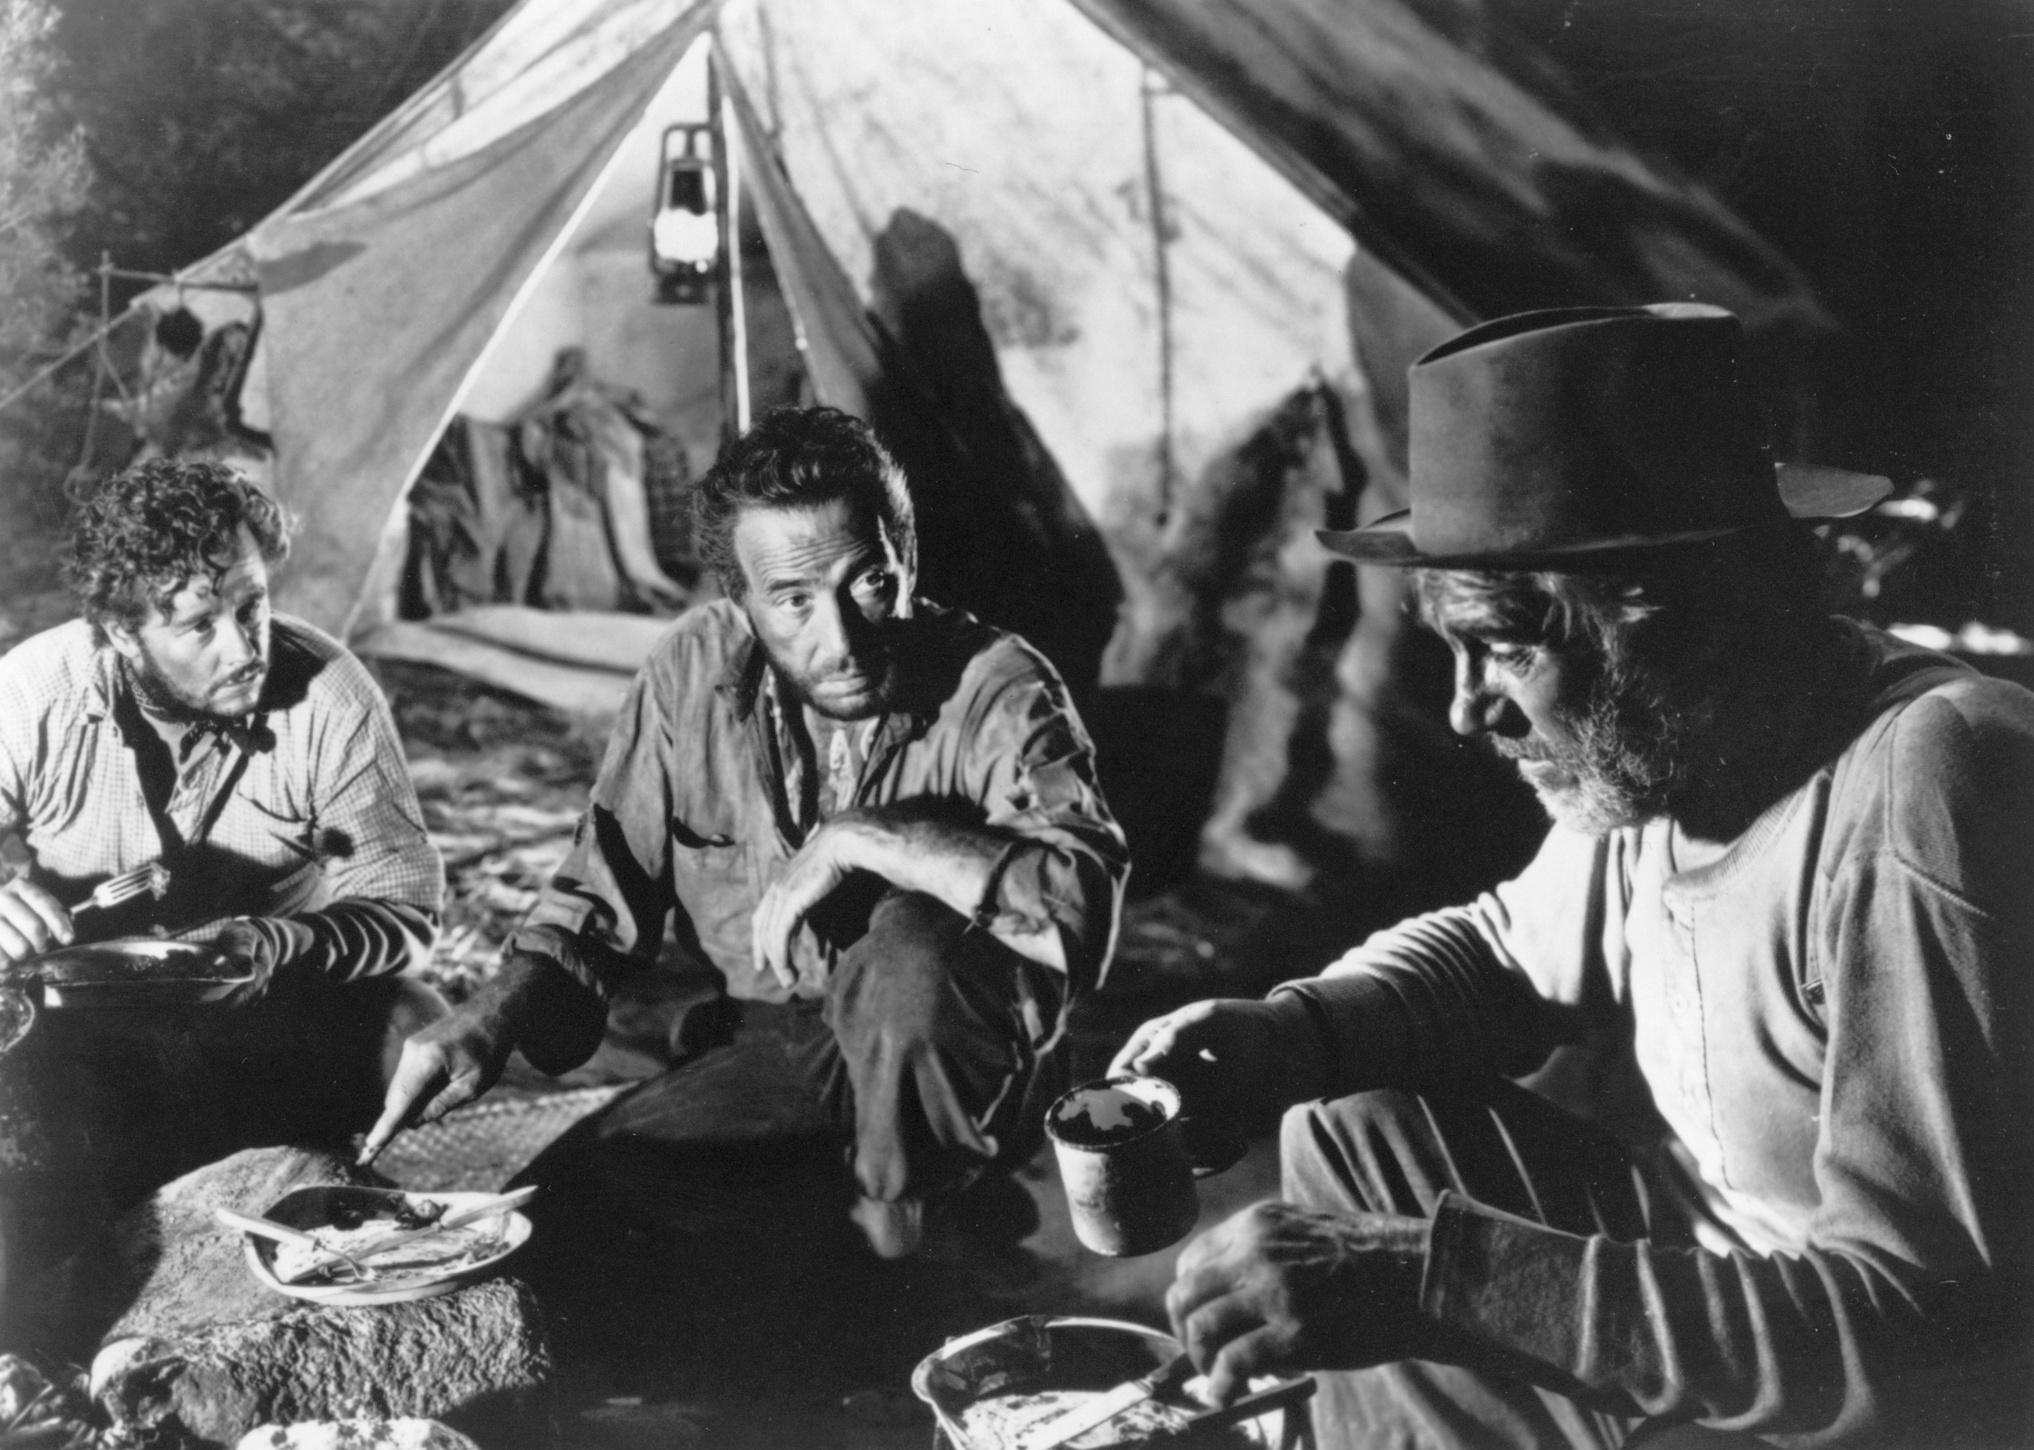 Humphrey Bogart and two other men eating in front of a tent.